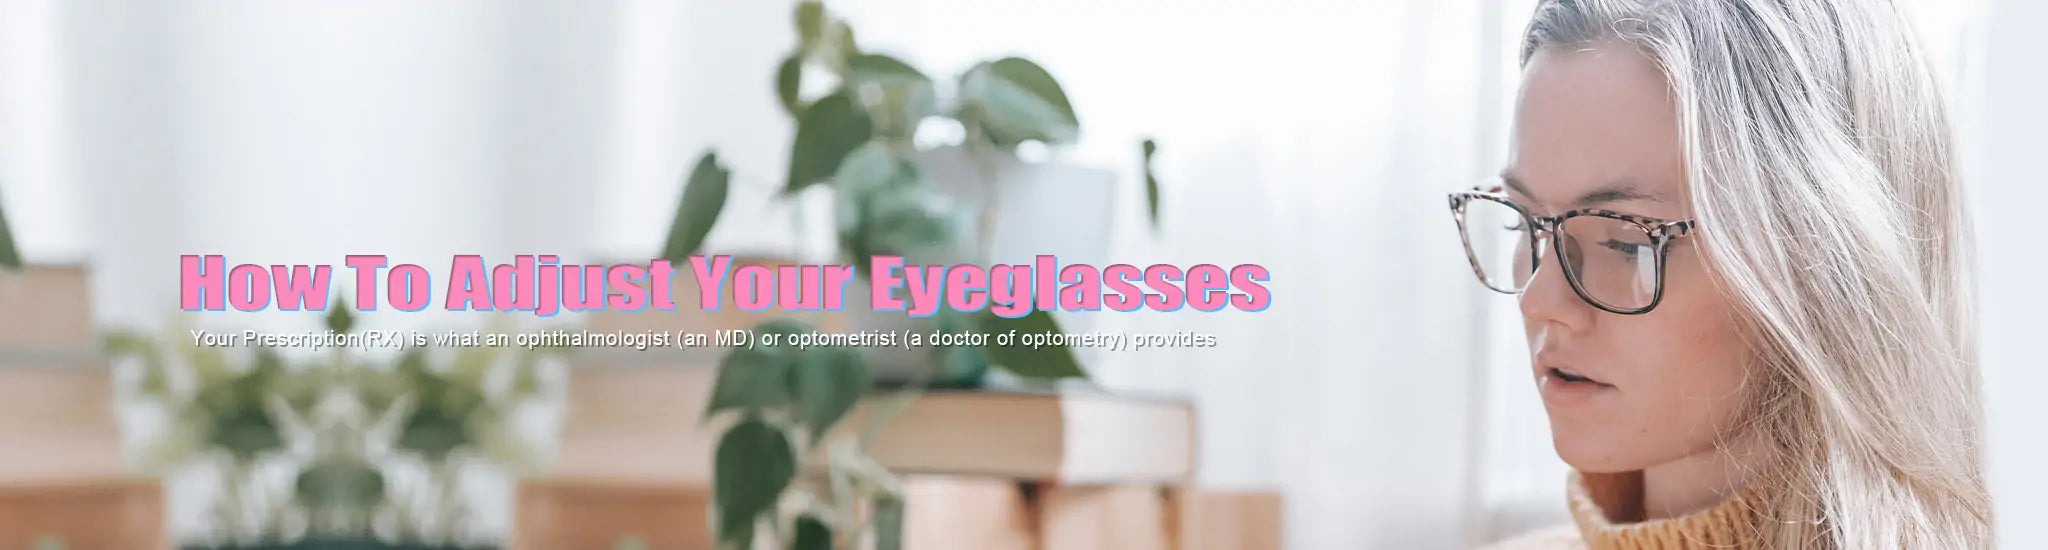 how-to-adjust-your-eyeglasses